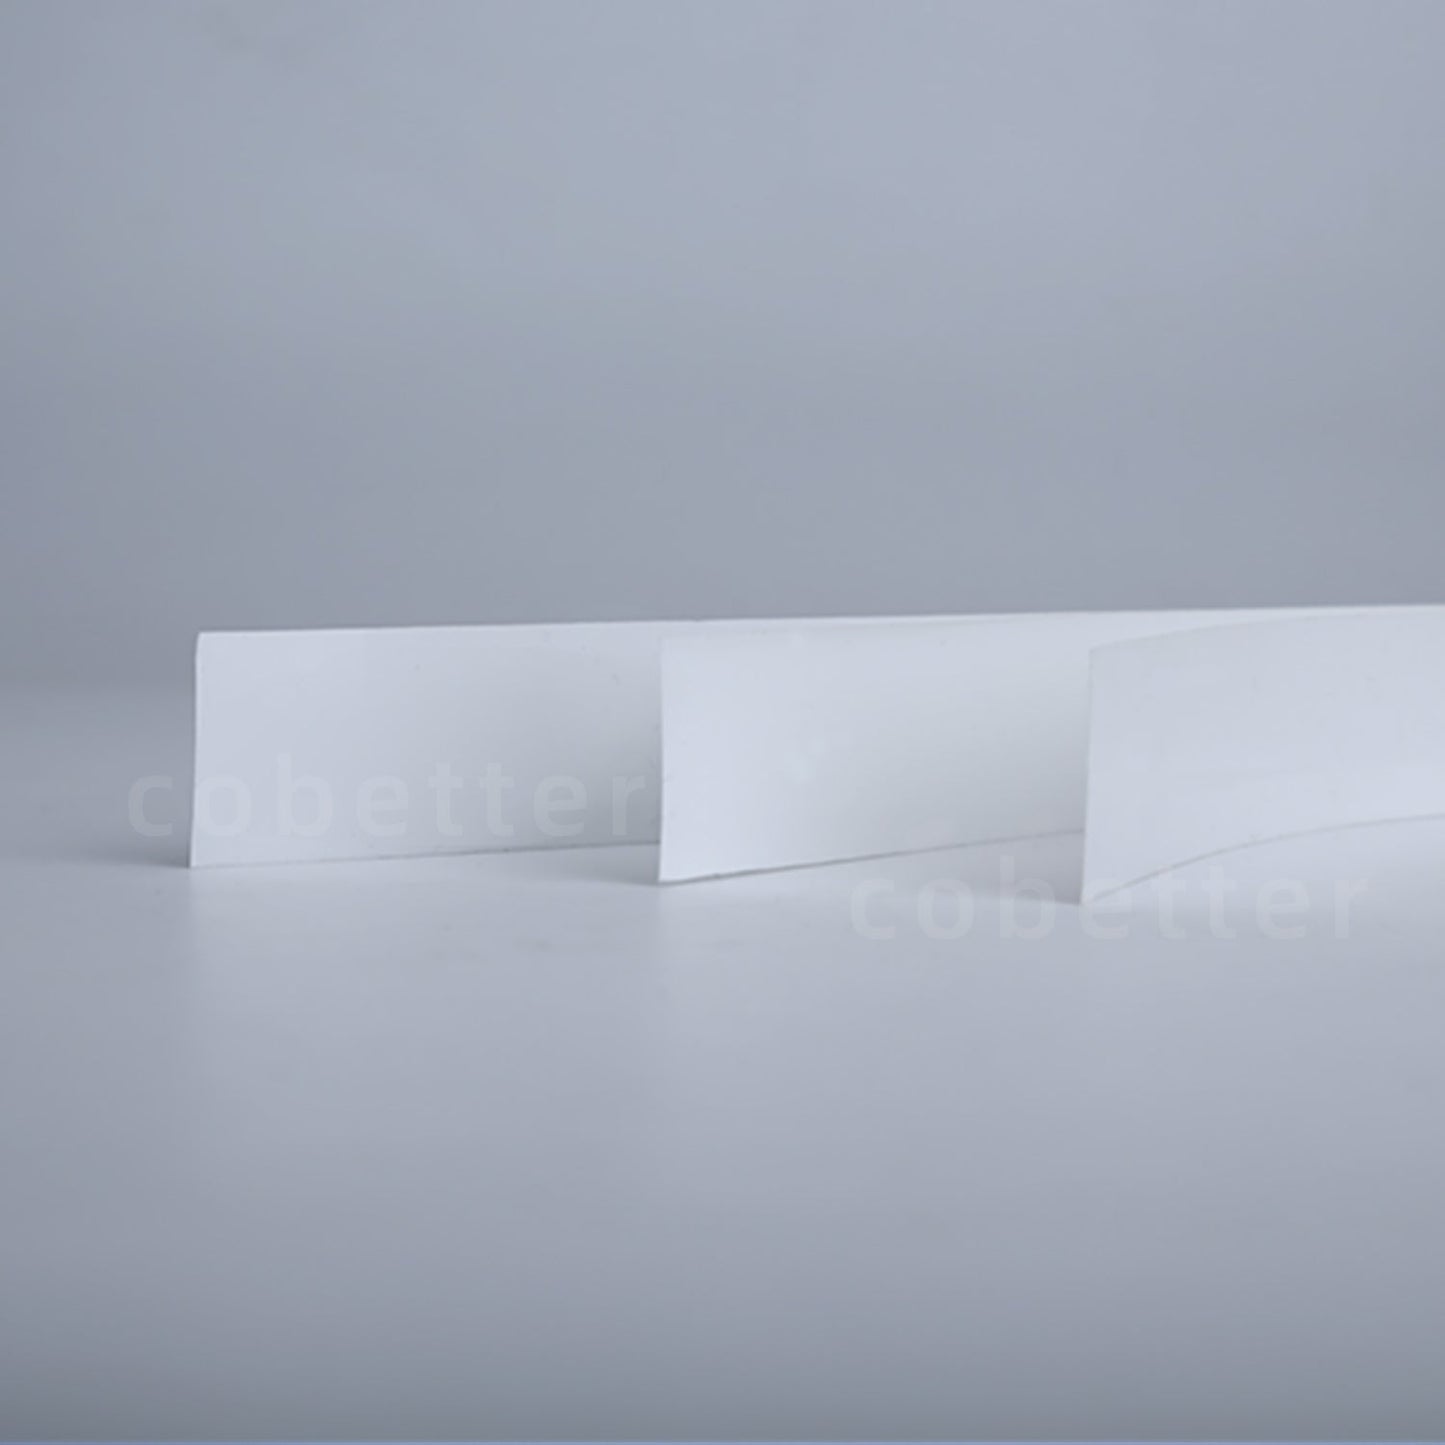 COBETTER NC95C Nitrocellulose (NC) Membrane for Lateral Flow Immunochromatography Tests